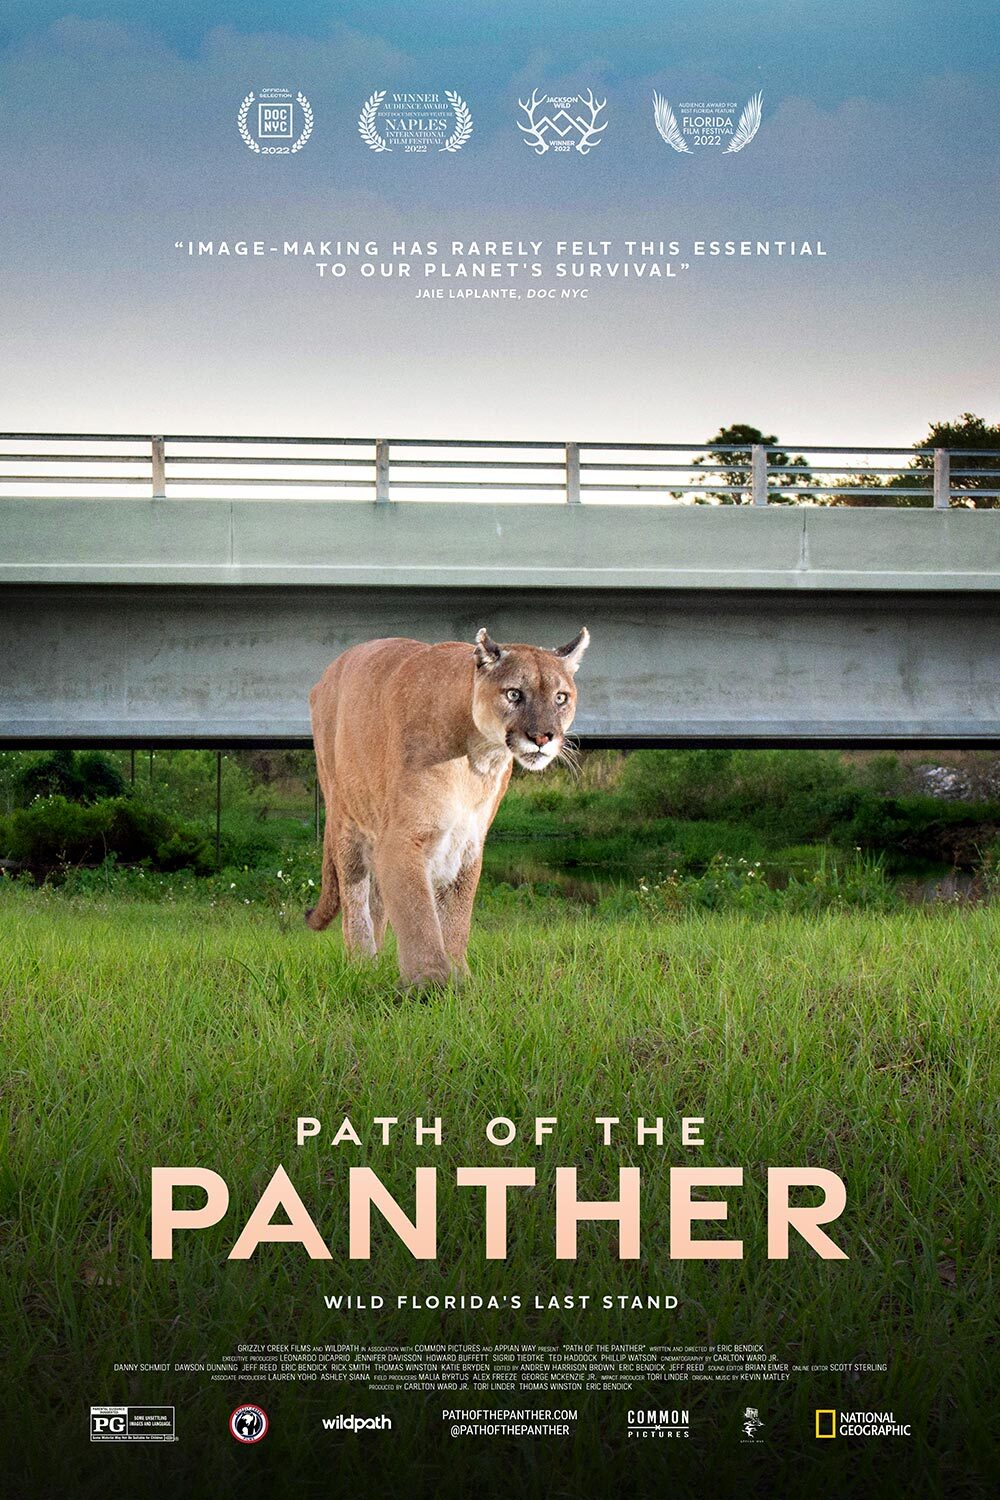 Movie poster for Path of the Panther, panther walking in grass